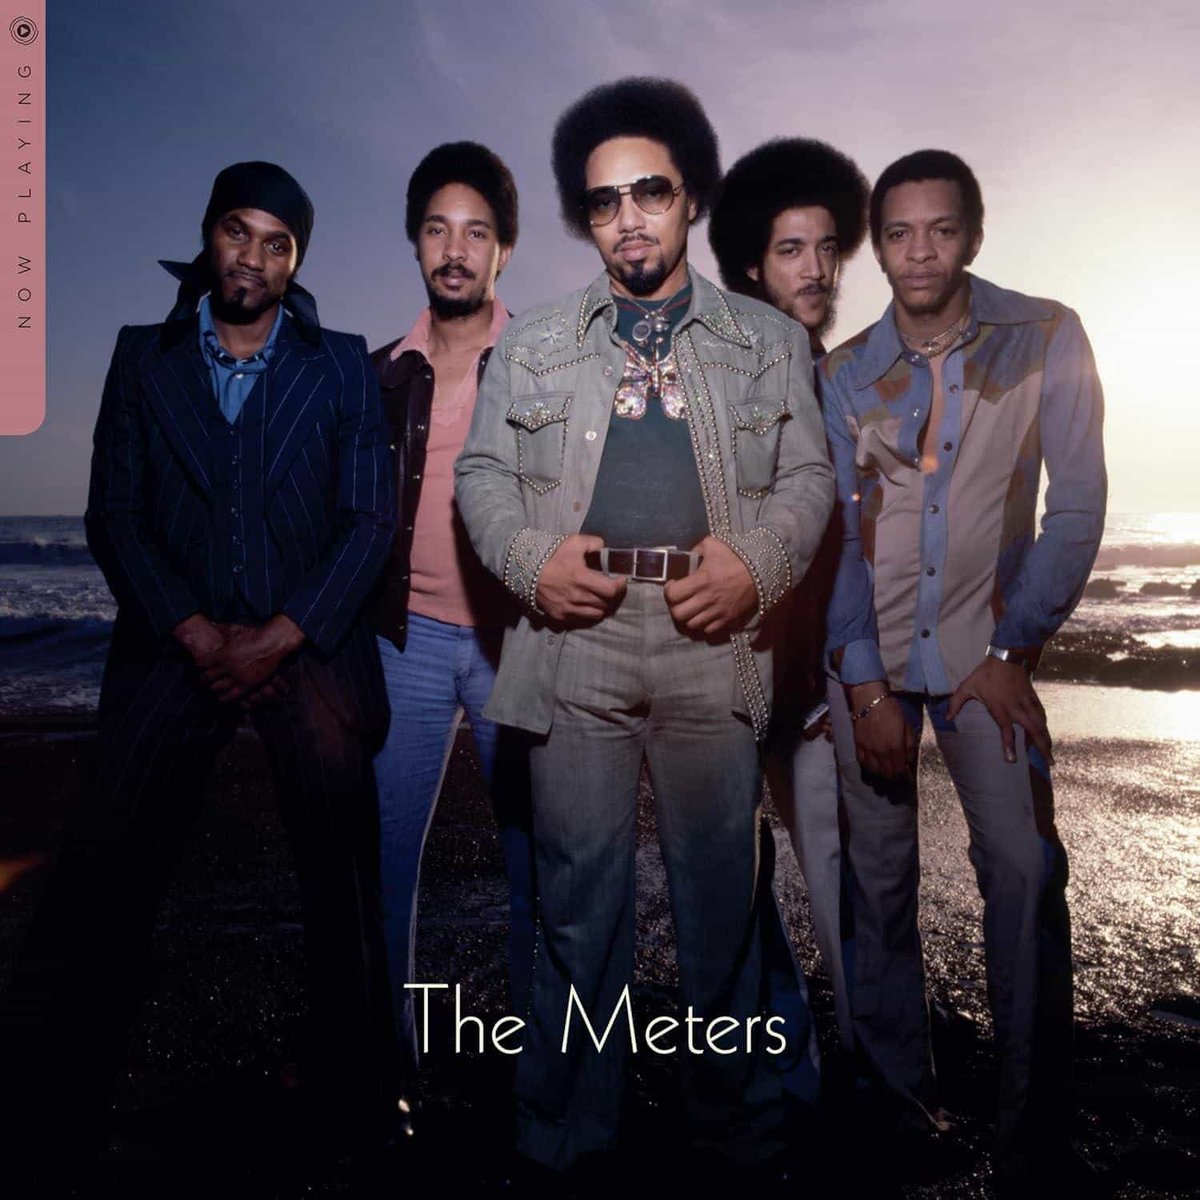 JUST IN! 'Now Playing' by The Meters New Orleans R&B and deep funk loaded with lean (cissy) struttin grooves and killer bass workouts. Best of collection on @Rhino_Records. normanrecords.com/records/203323…